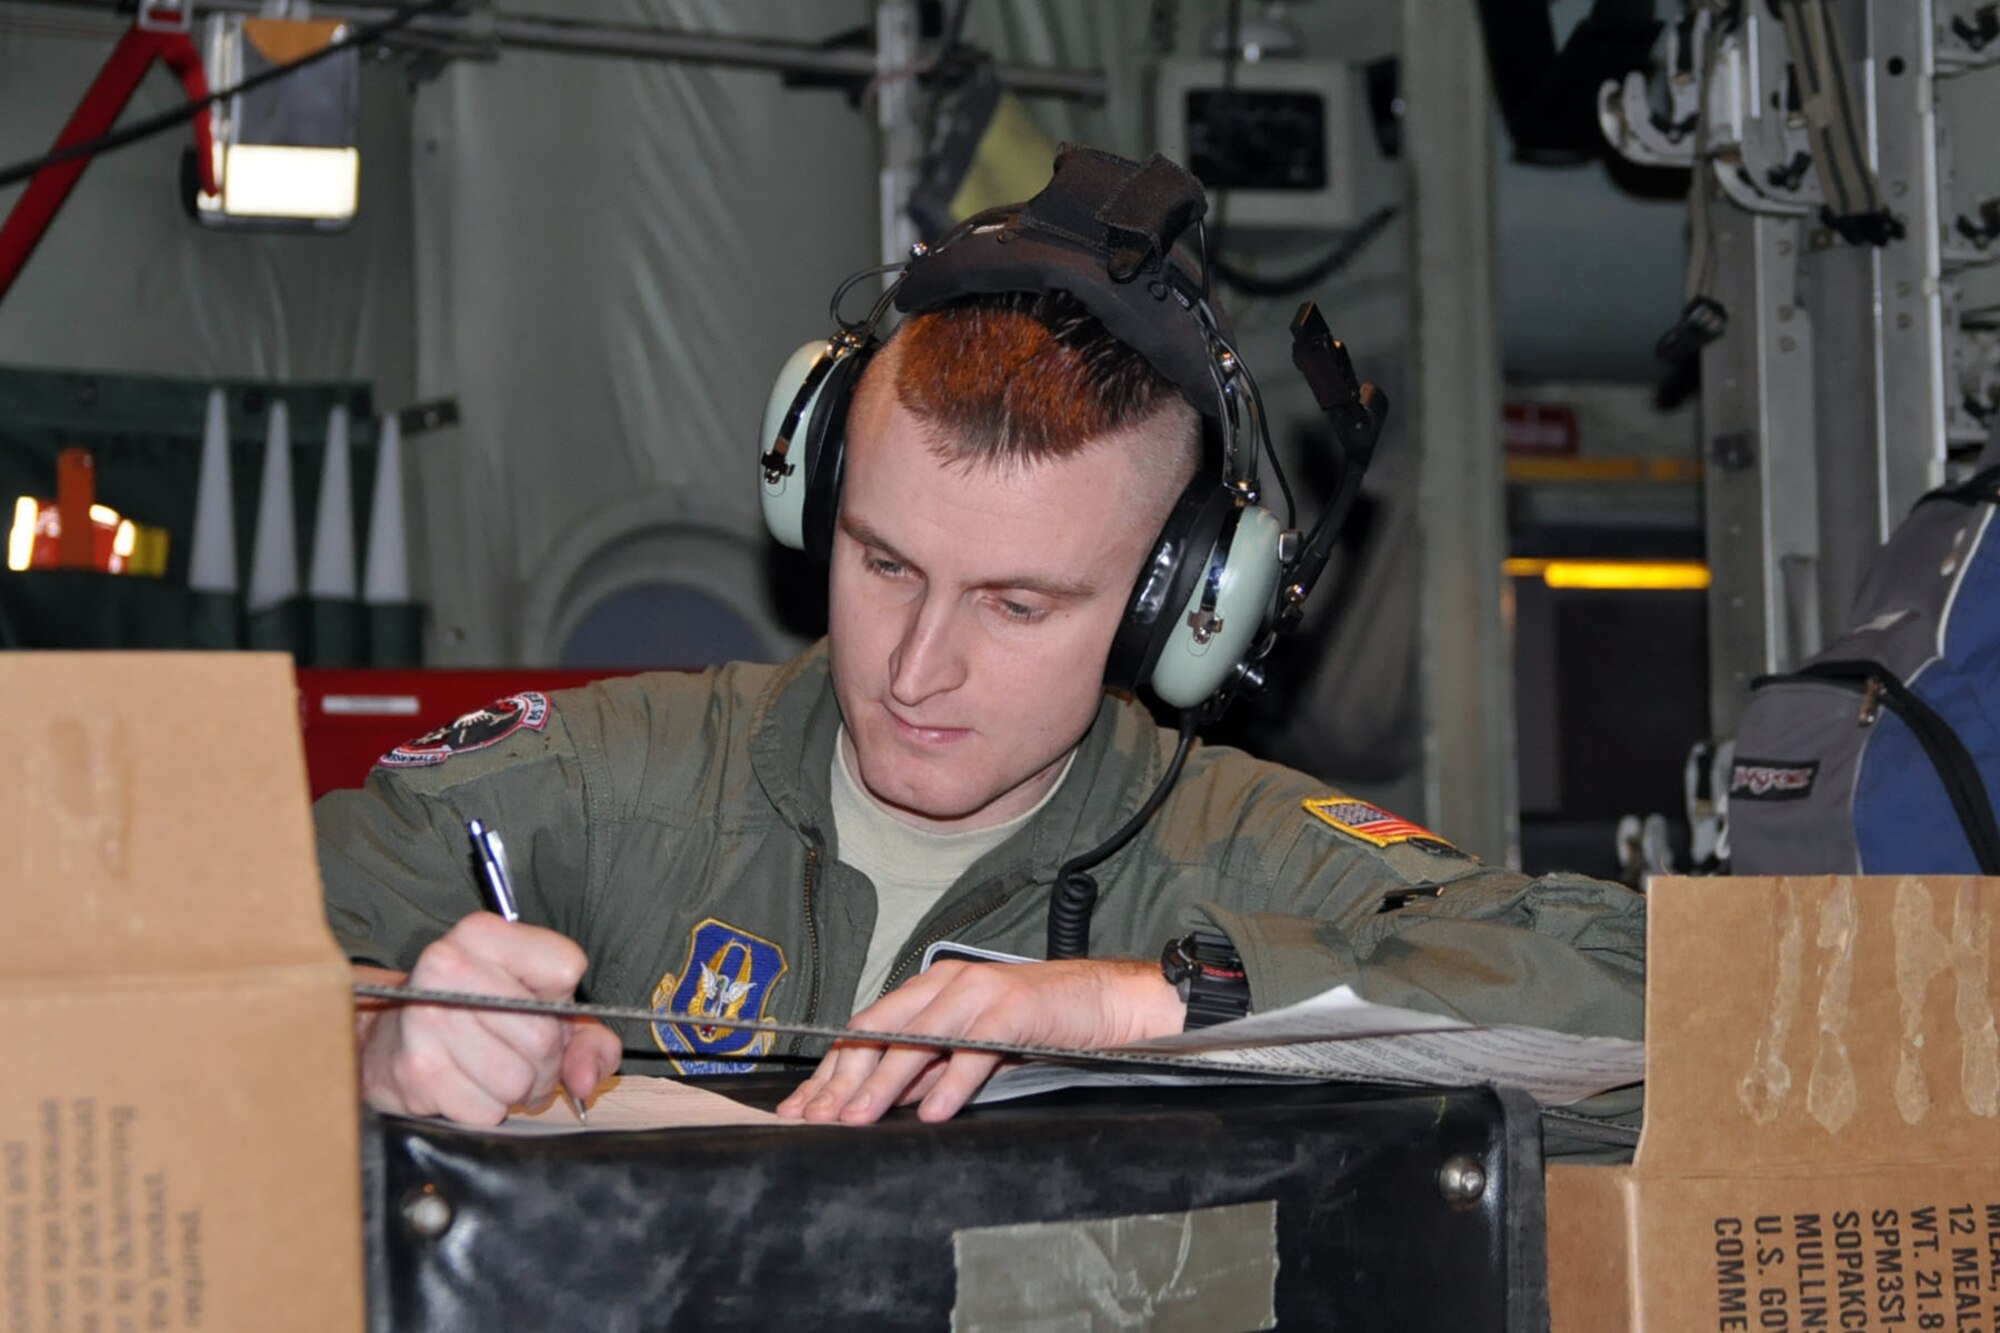 SOMEHWERE OVER THE CARIBBEAN SEA -- Air Force Reserve Staff Sgt. Michael Culp, a loadmaster assigned to the 773rd Airlift Squadron, fills out customs declaration forms as part of his duties aboard a C-130H Hercules tactical cargo transport aircraft on an airlift mission, January 17, in support of relief efforts in the aftermath of an earthquake that devastated Port-au-Prince, the capital of Haiti. Sergeant Culp, one of two loadmasters responsible for payload on the aircraft, is among a 12-person crew, assigned to the 910th Airlift Wing, based out of Youngstown Air Reserve Station, Ohio, bound for Soto Cano Air Base, Honduras to pick up cargo in support of the massive international effort to aid the people of the stricken island nation. The 910th currently has three aircraft, crews of more than 30 personnel flying relief effort missions and a myriad of Citizen Airmen working at YARS to provide home station support to the crews. The 910th Airlift Wing stands ready to provide airlift capabilities to the massive humanitarian effort as long as needed by mission requirements.